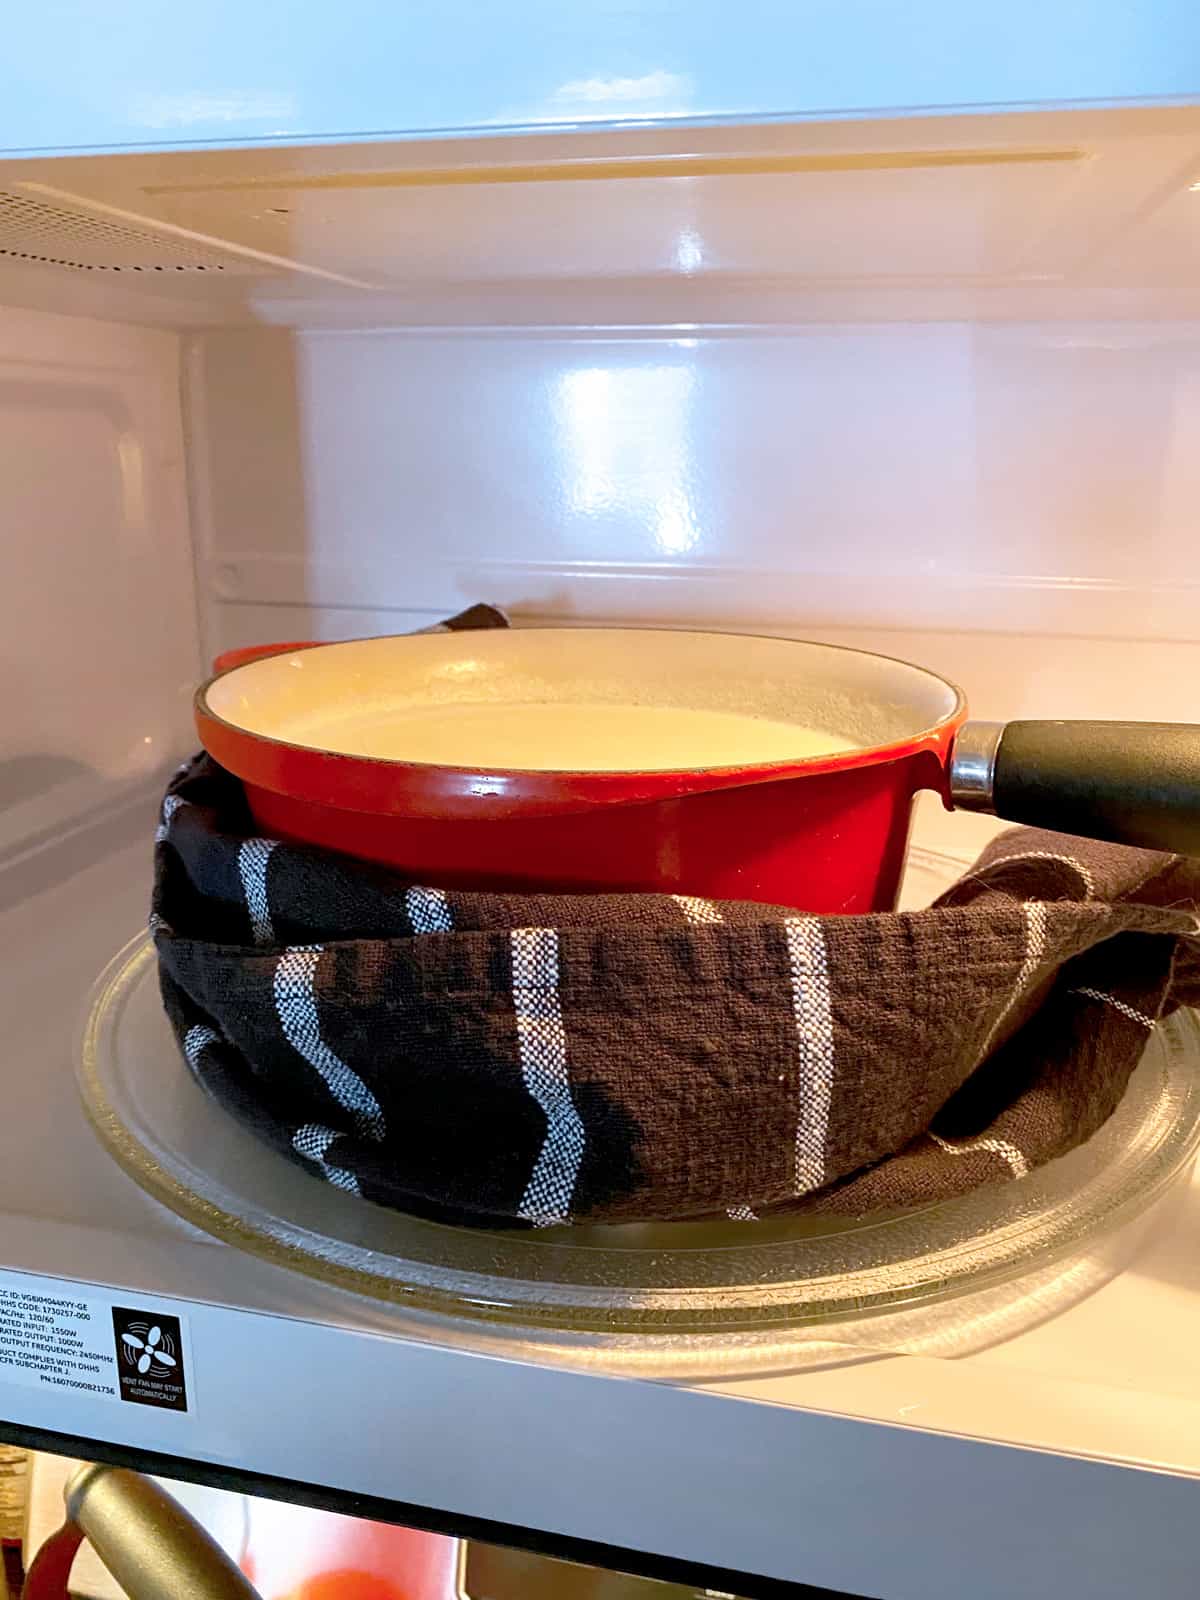 A red sauce pan with a towel wrapped around it in a microwave oven.